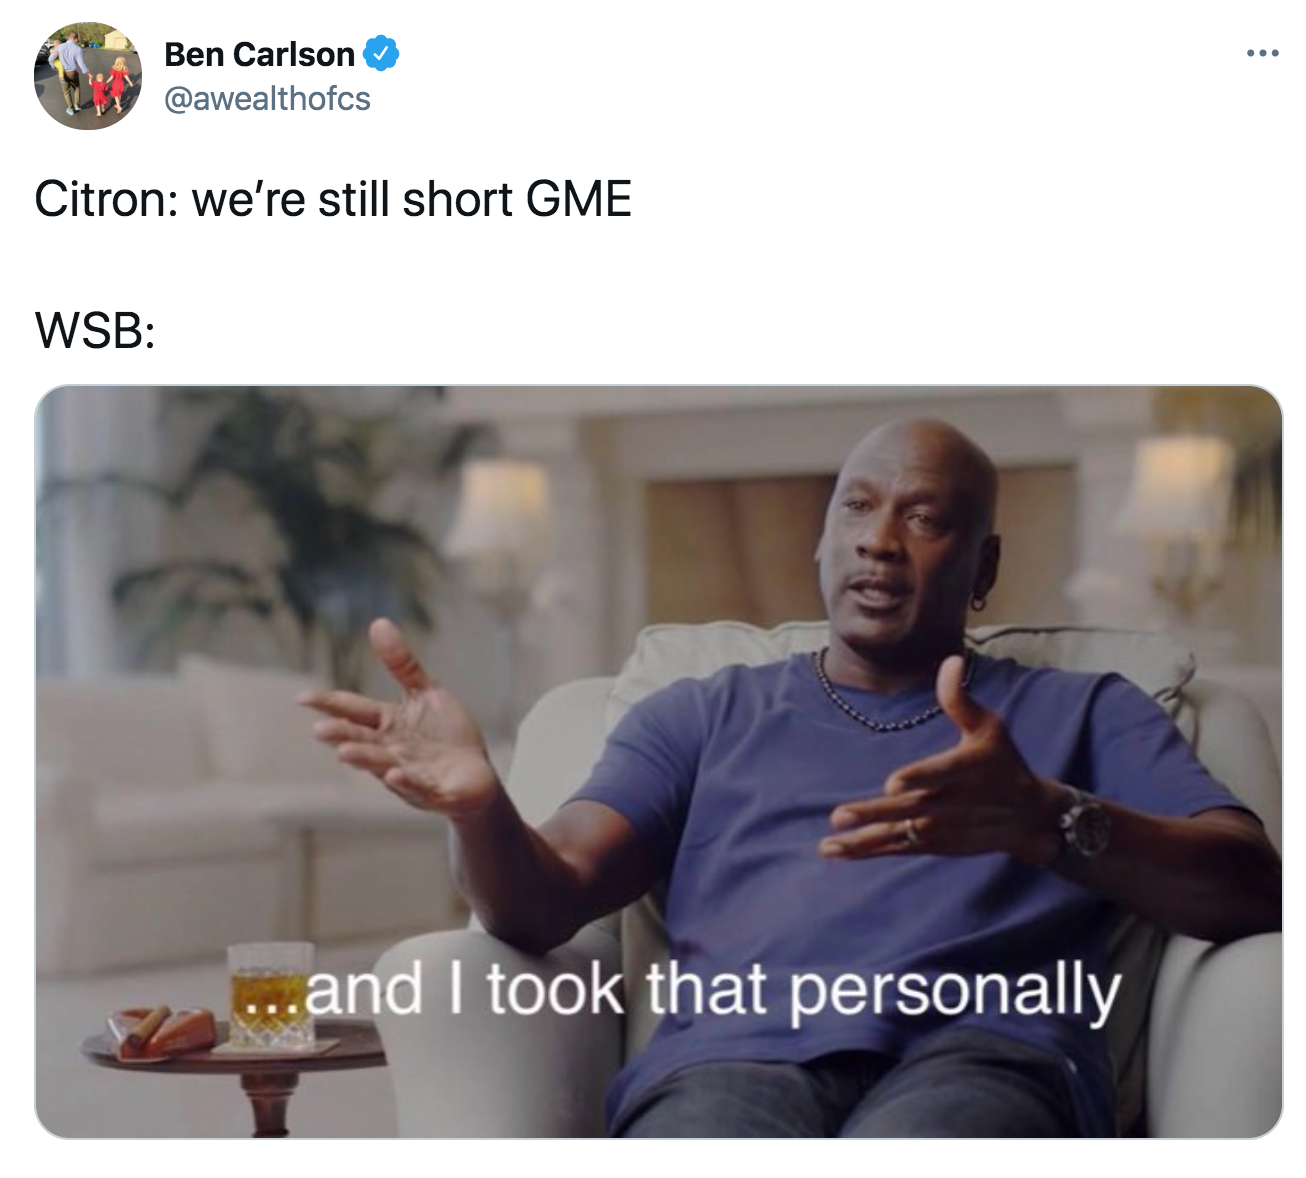 arizona and i took that personally meme - ... Ben Carlson Citron we're still short Gme Wsb ...and I took that personally